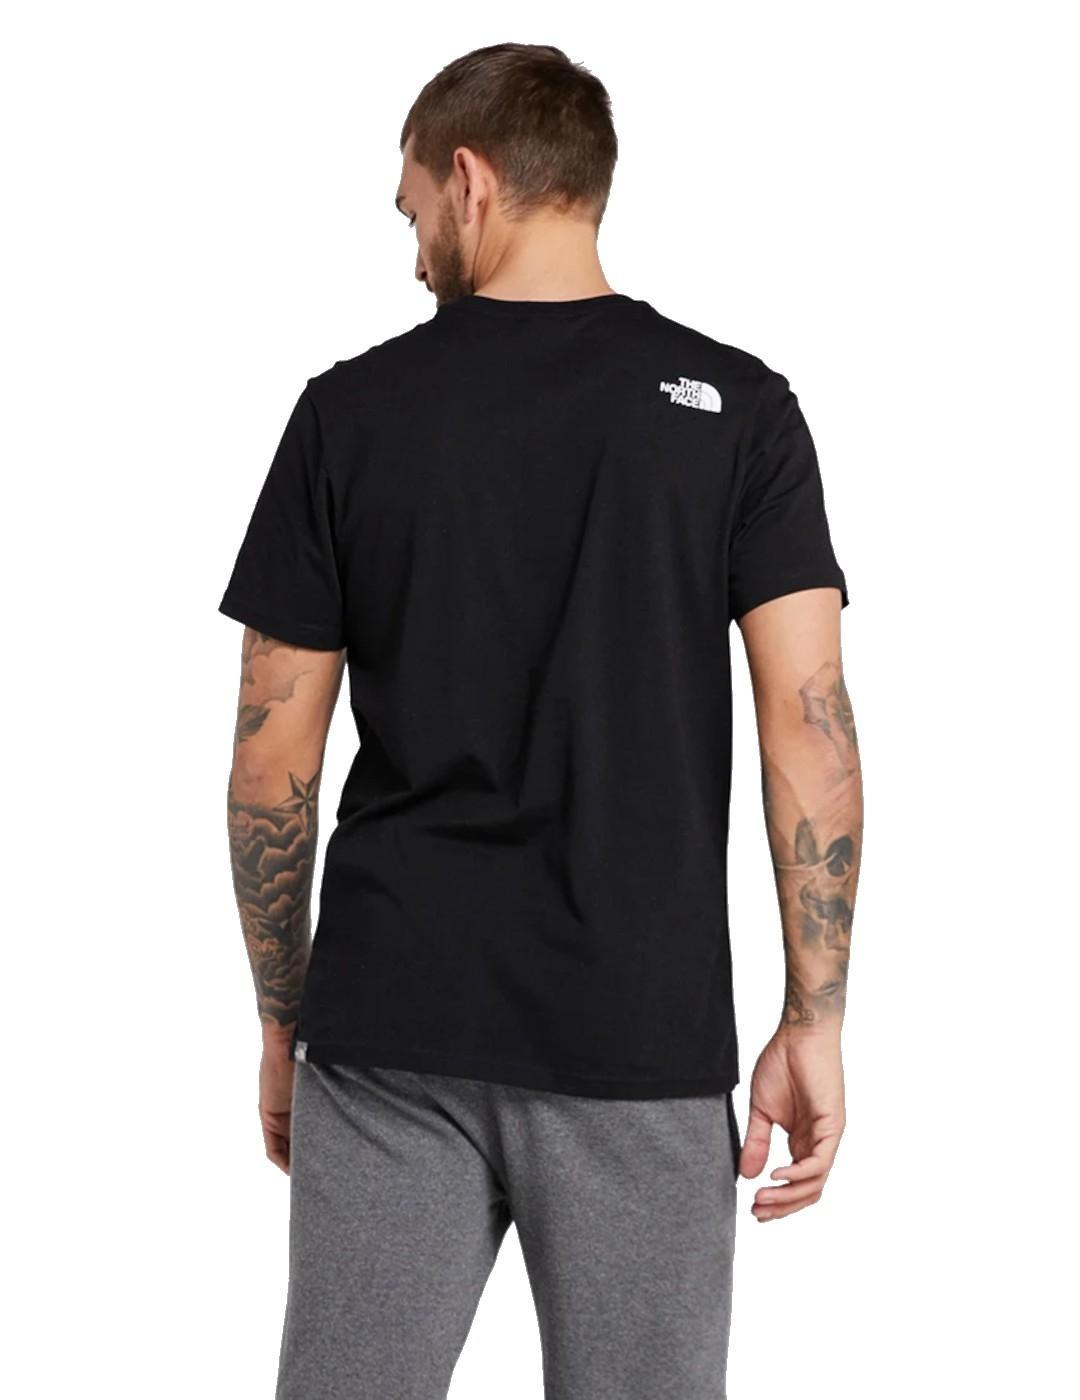 Camiseta Hombre The North Face Simple Dome Negra